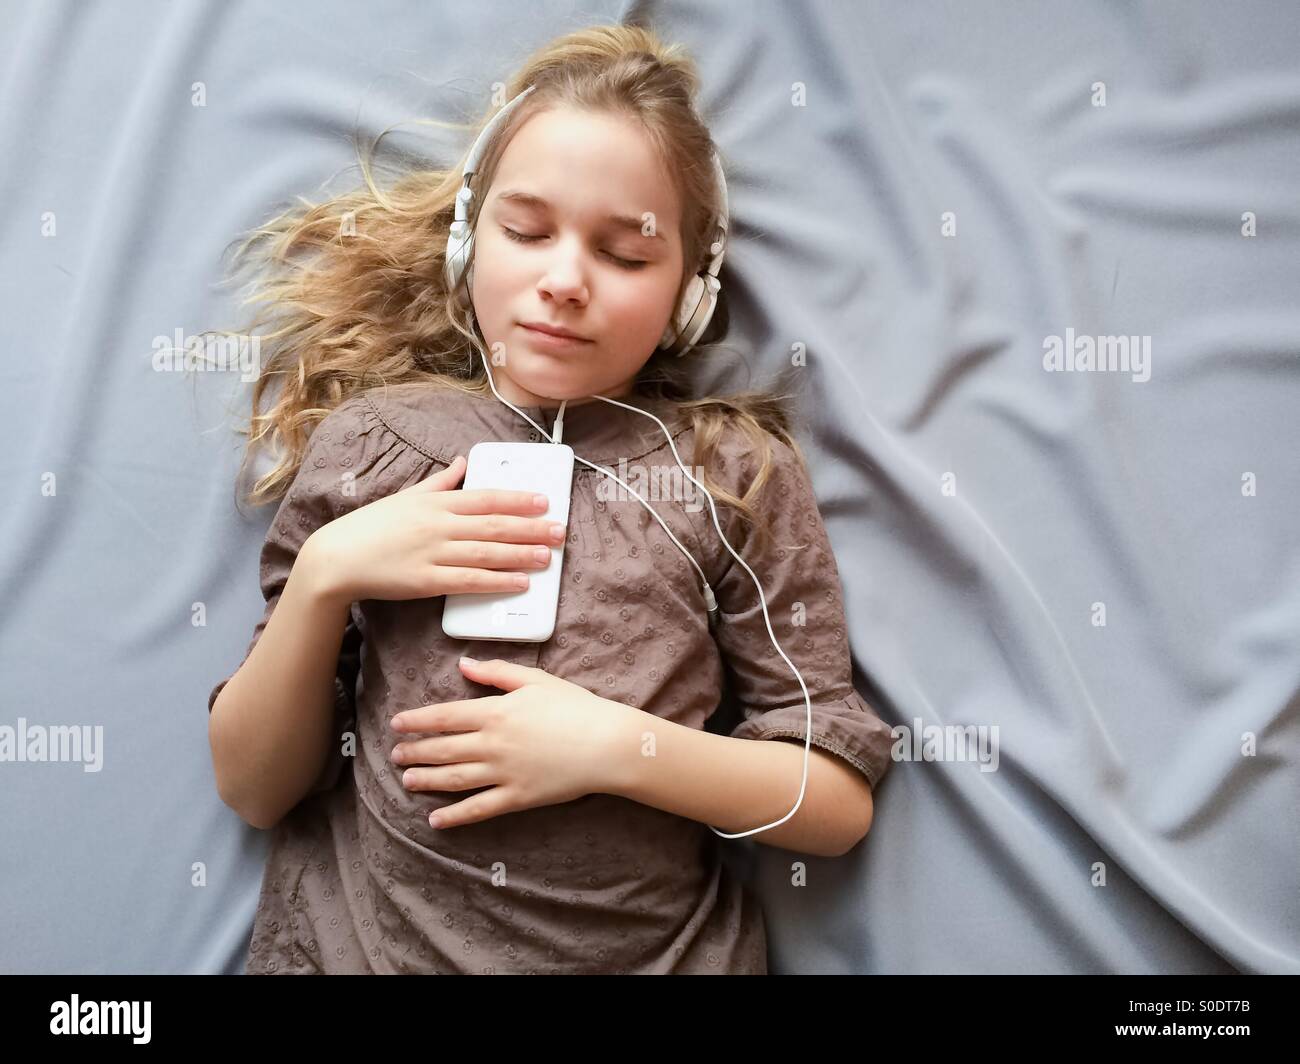 It sounds like a dream. Young girl lying on the bed and dreaming about something with closed eyes. Stock Photo